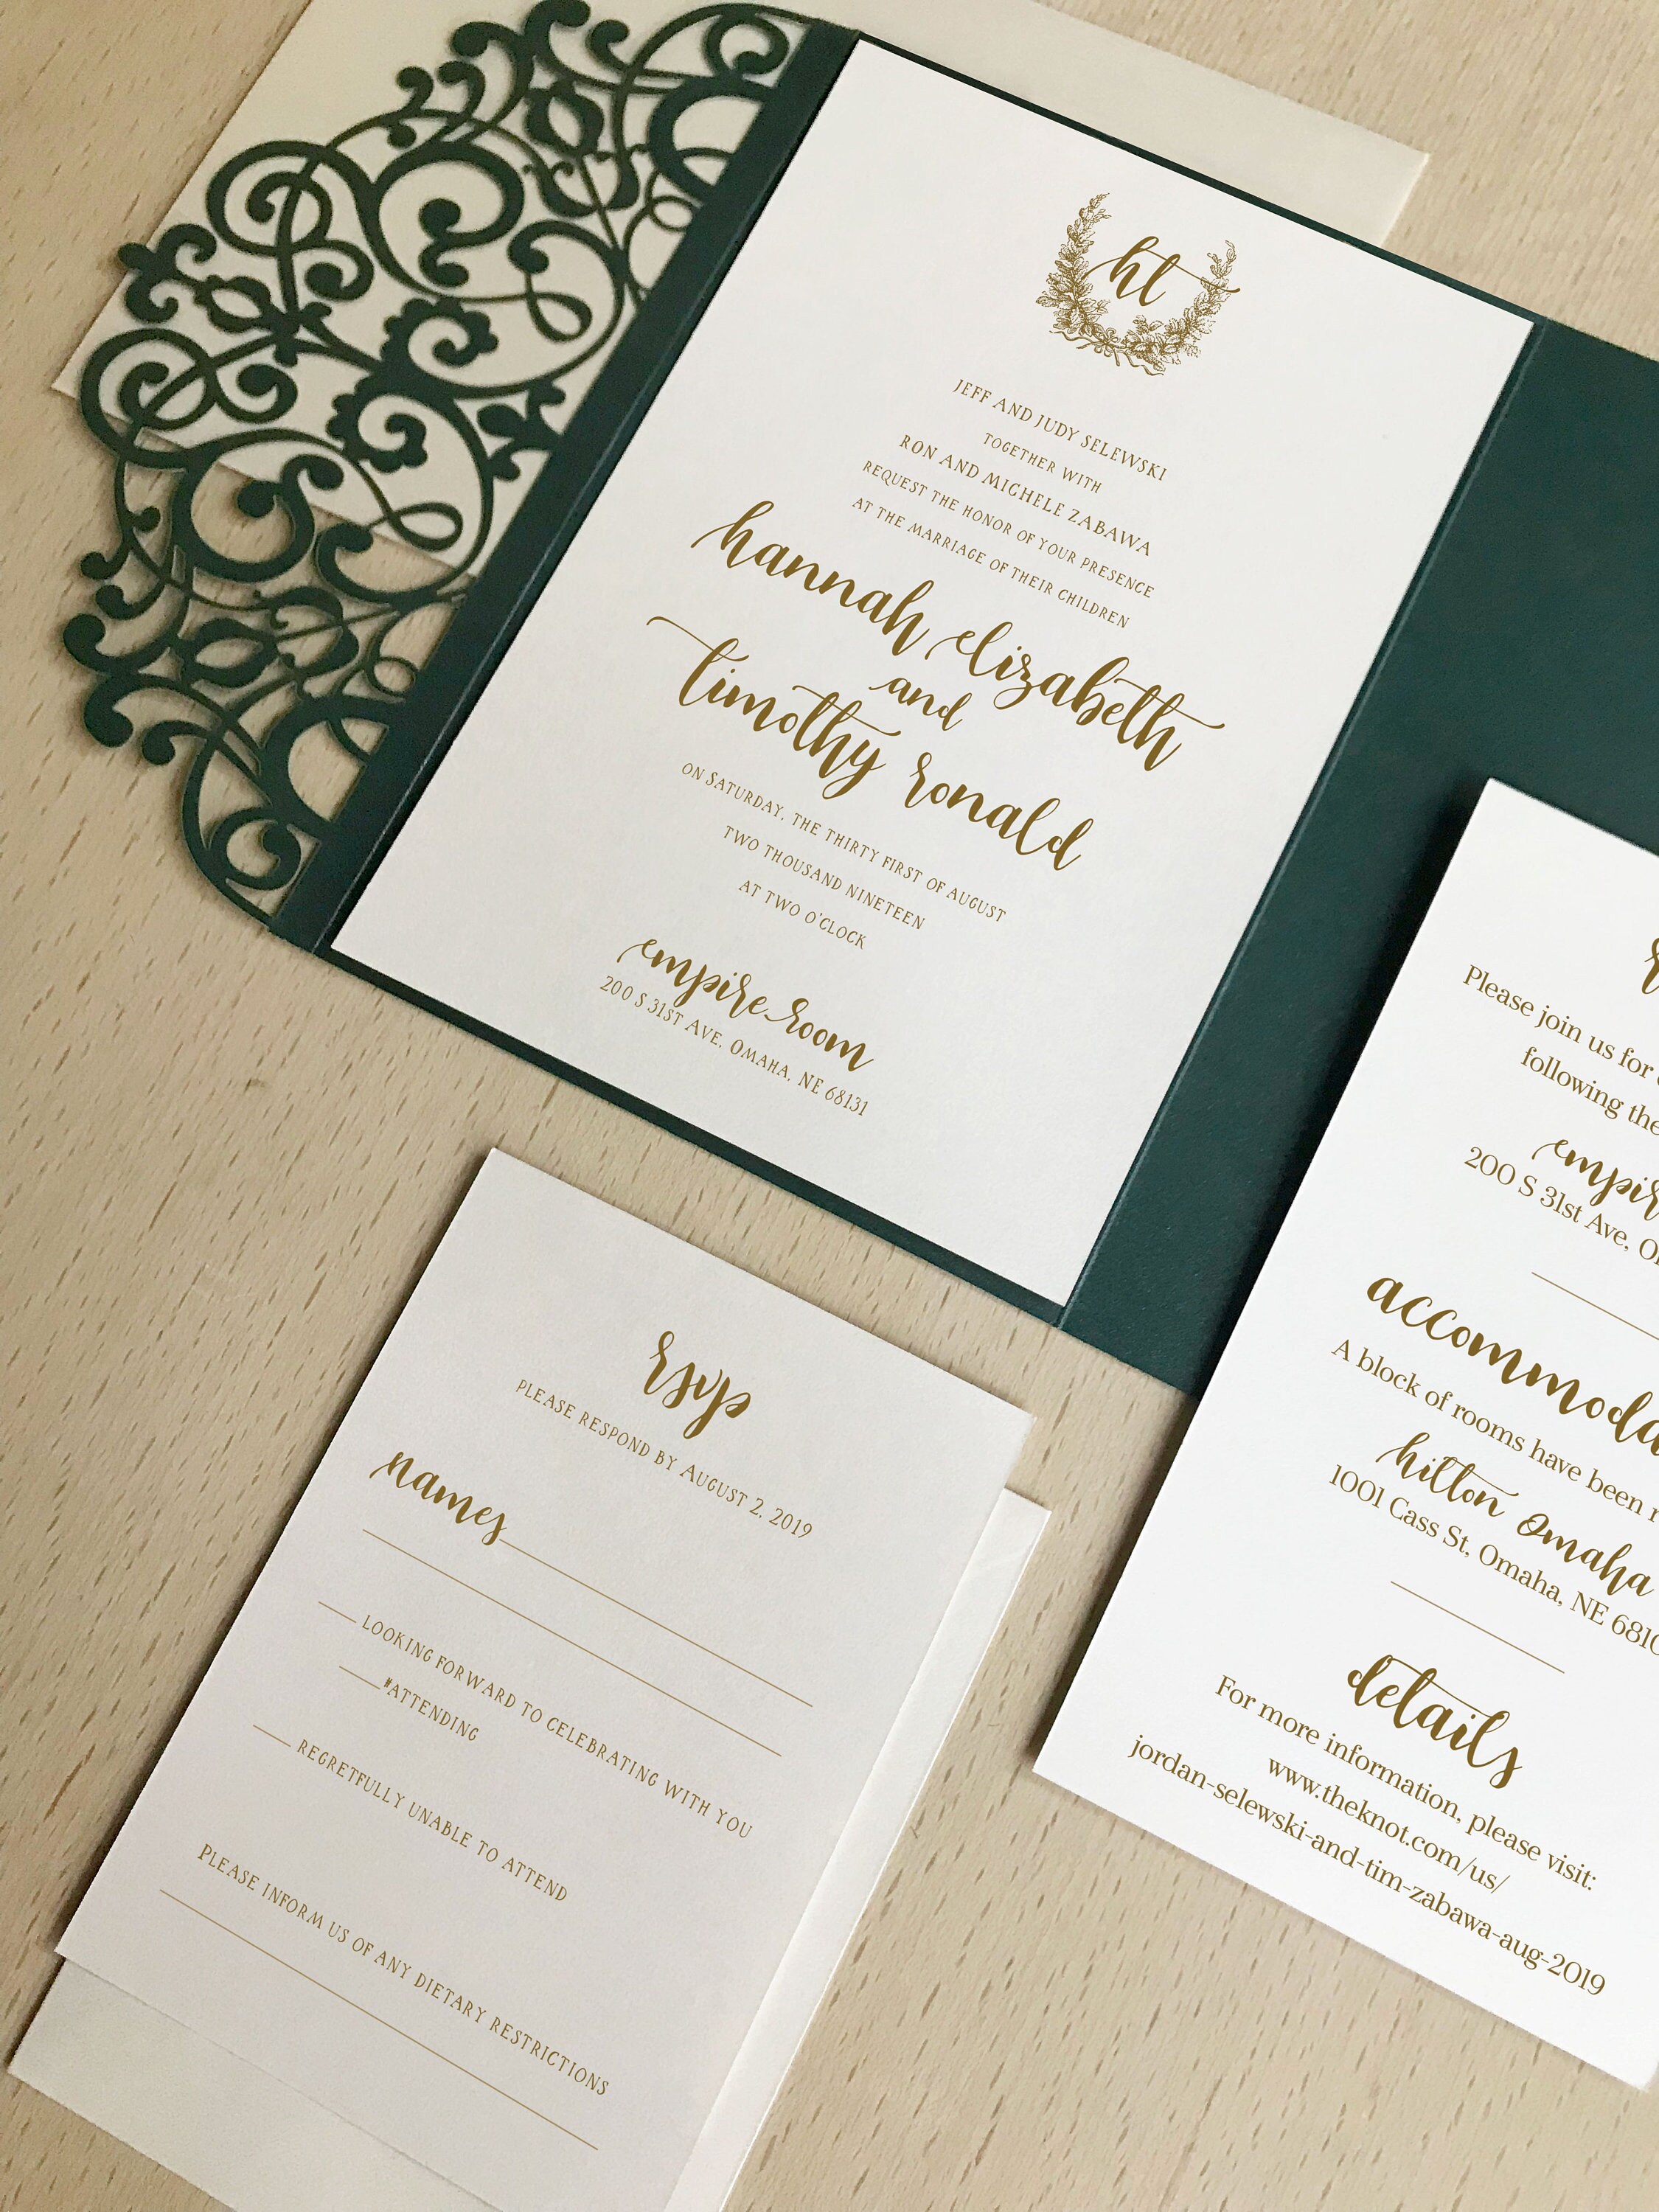 5x7 Metallic Gold Floral & Forest Green Wedding Invitation with Directions  Insert, Postcard RSVP and Envelope Liner. Different Color Options